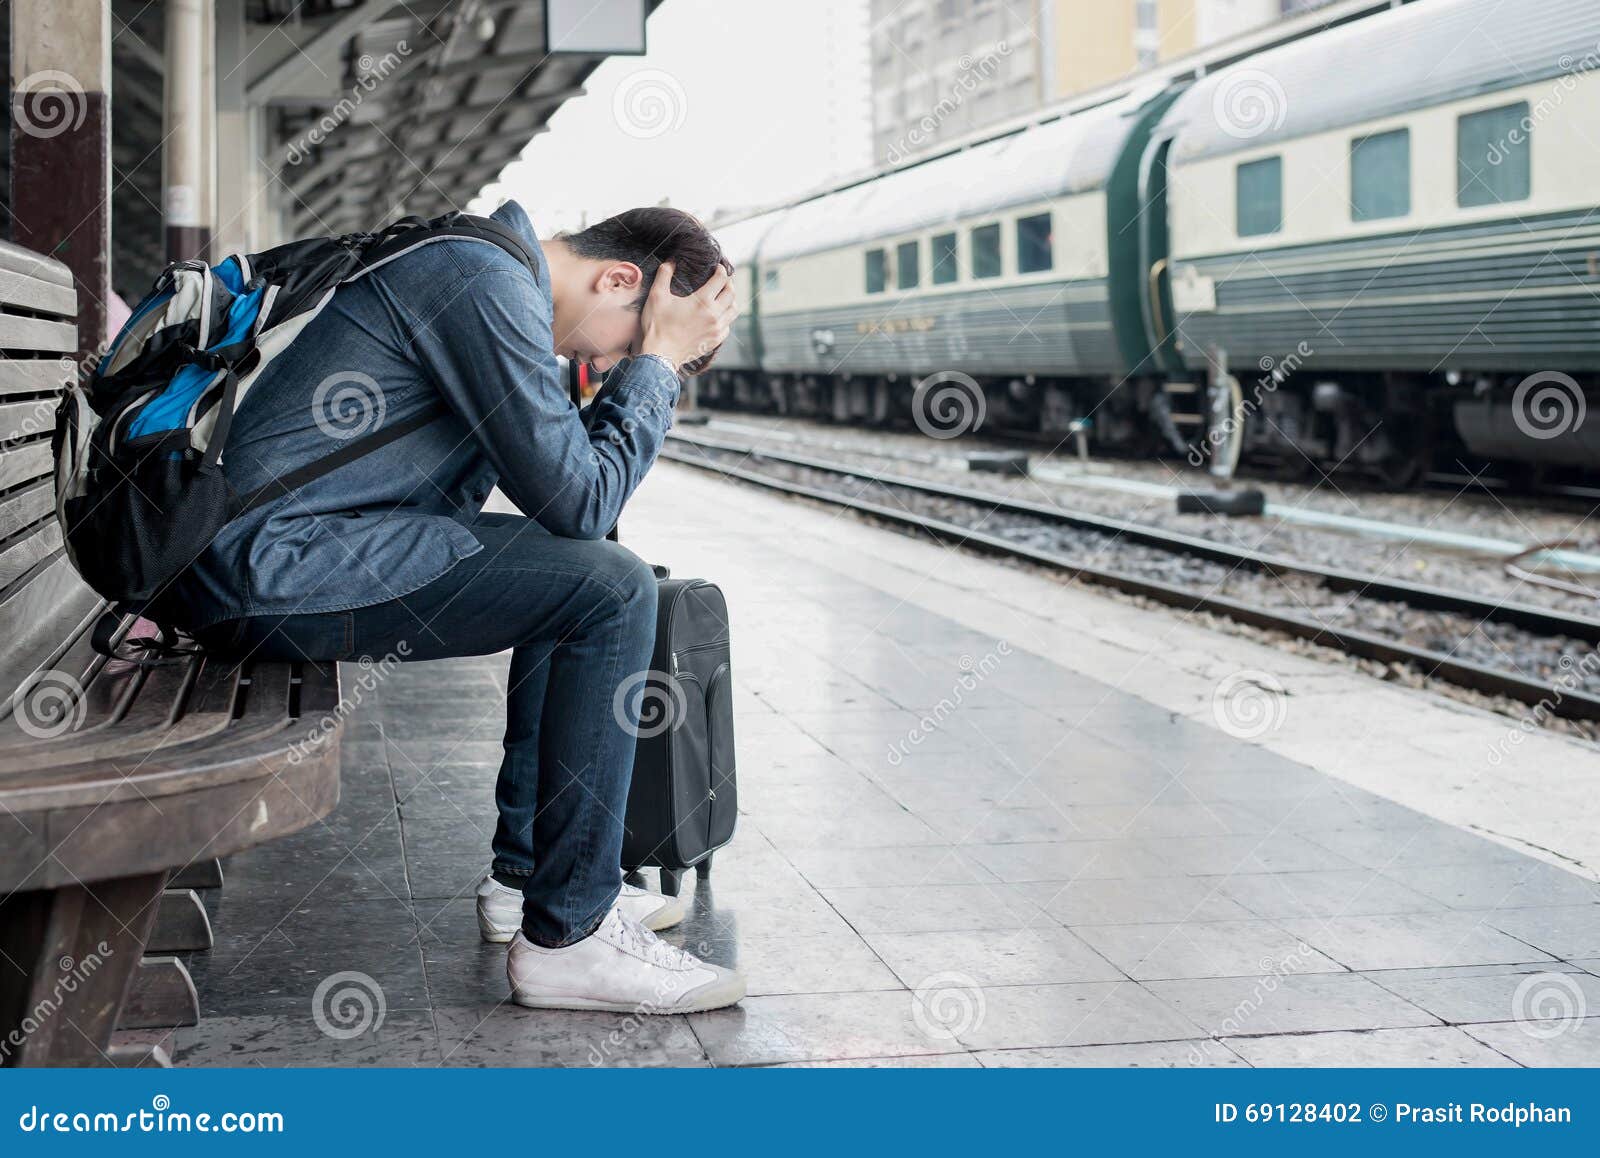 asian depressed traveler waiting at train station after mistakes